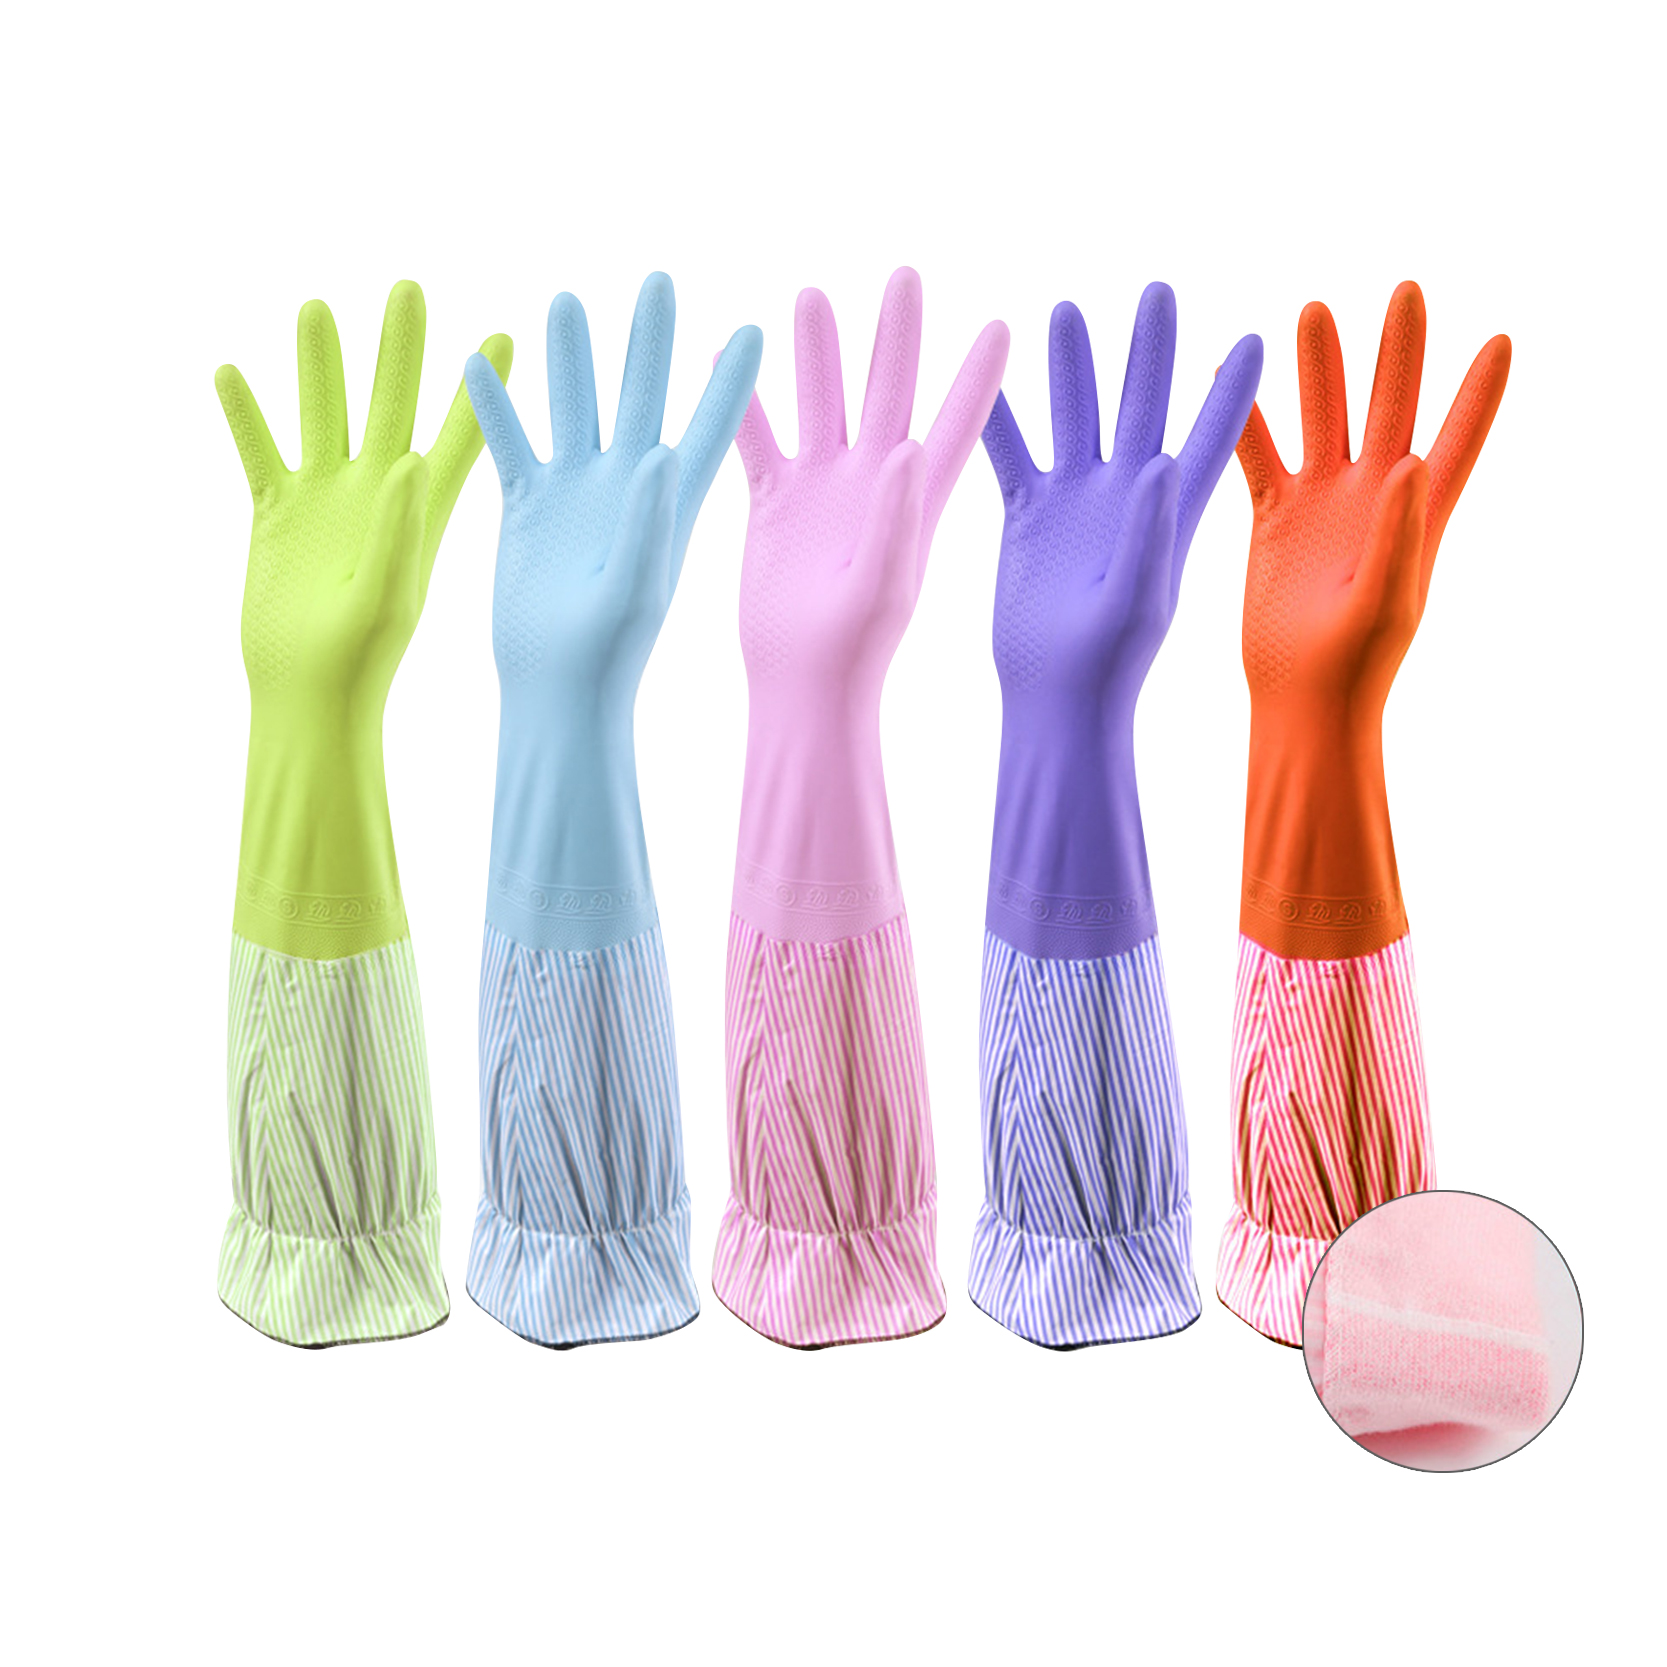 Latex Gloves Clean Long Gloves Winter Work Safety Gloves Woman Clean Tool Waterproof Dishwashing Household